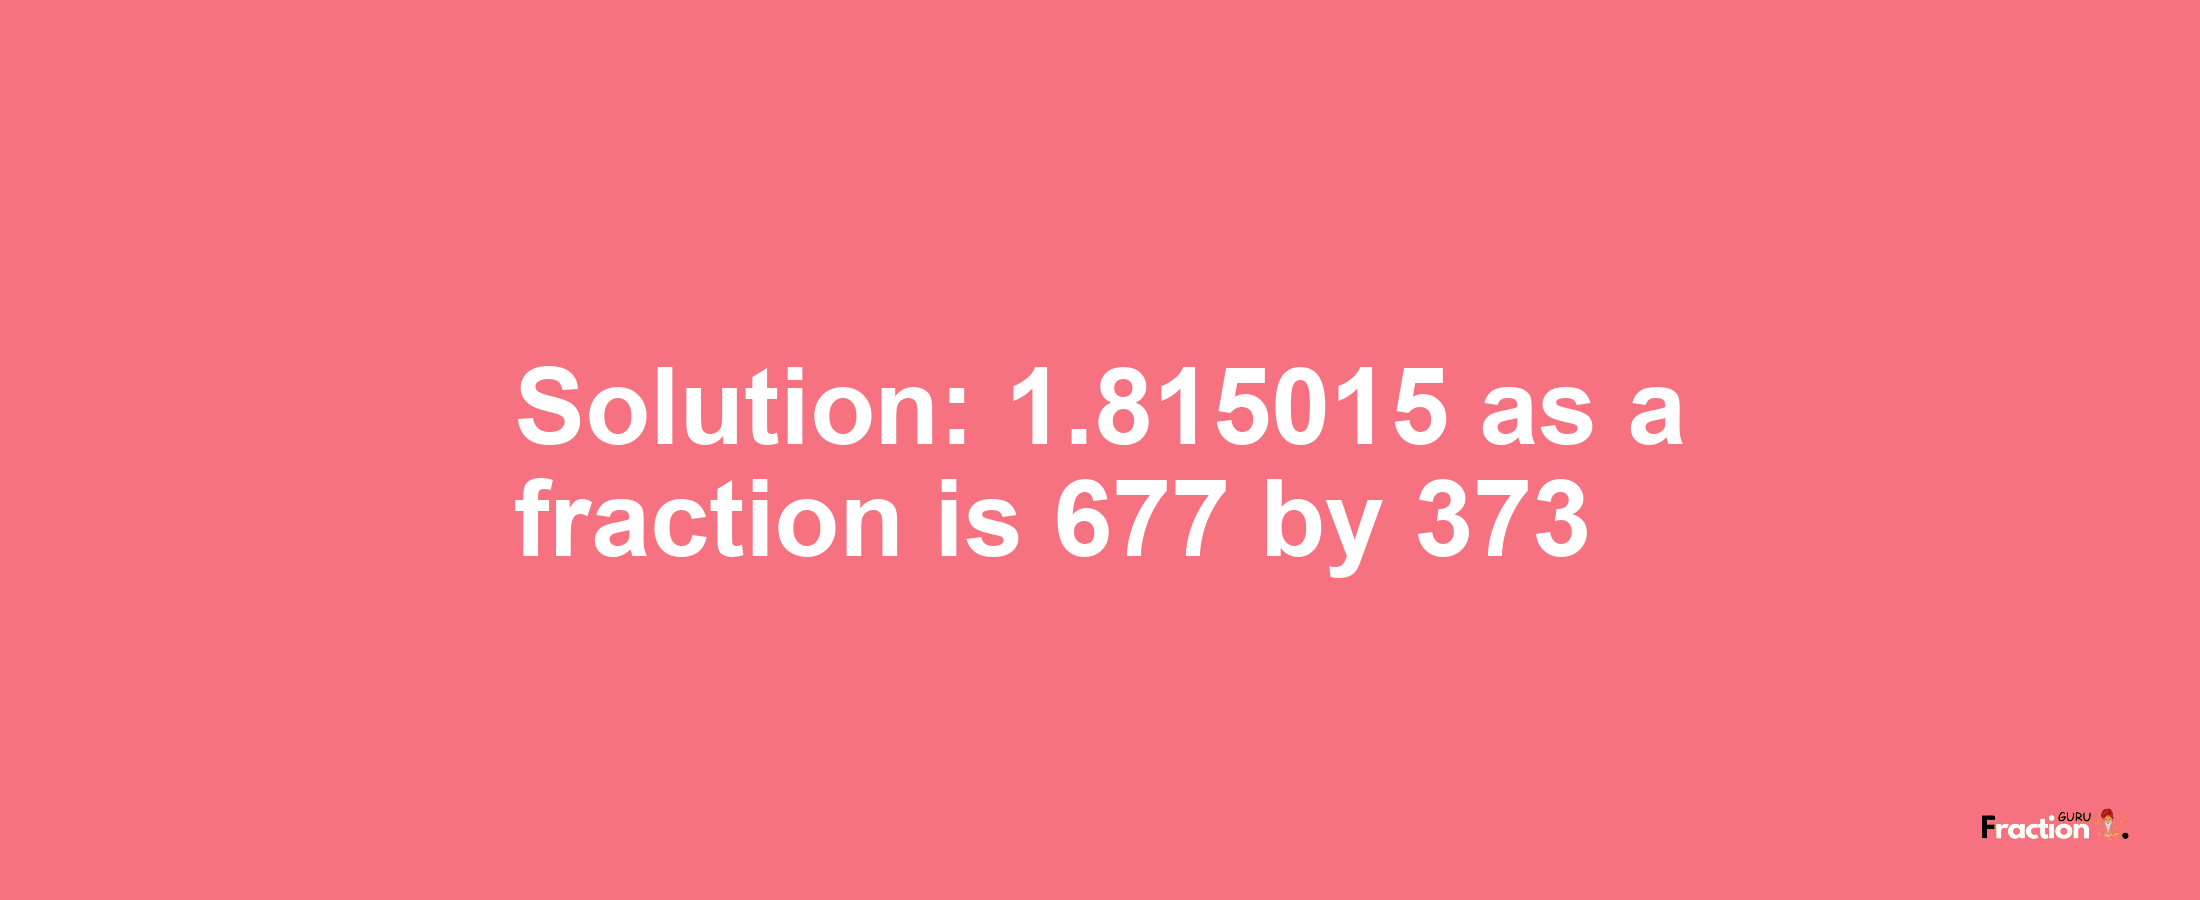 Solution:1.815015 as a fraction is 677/373